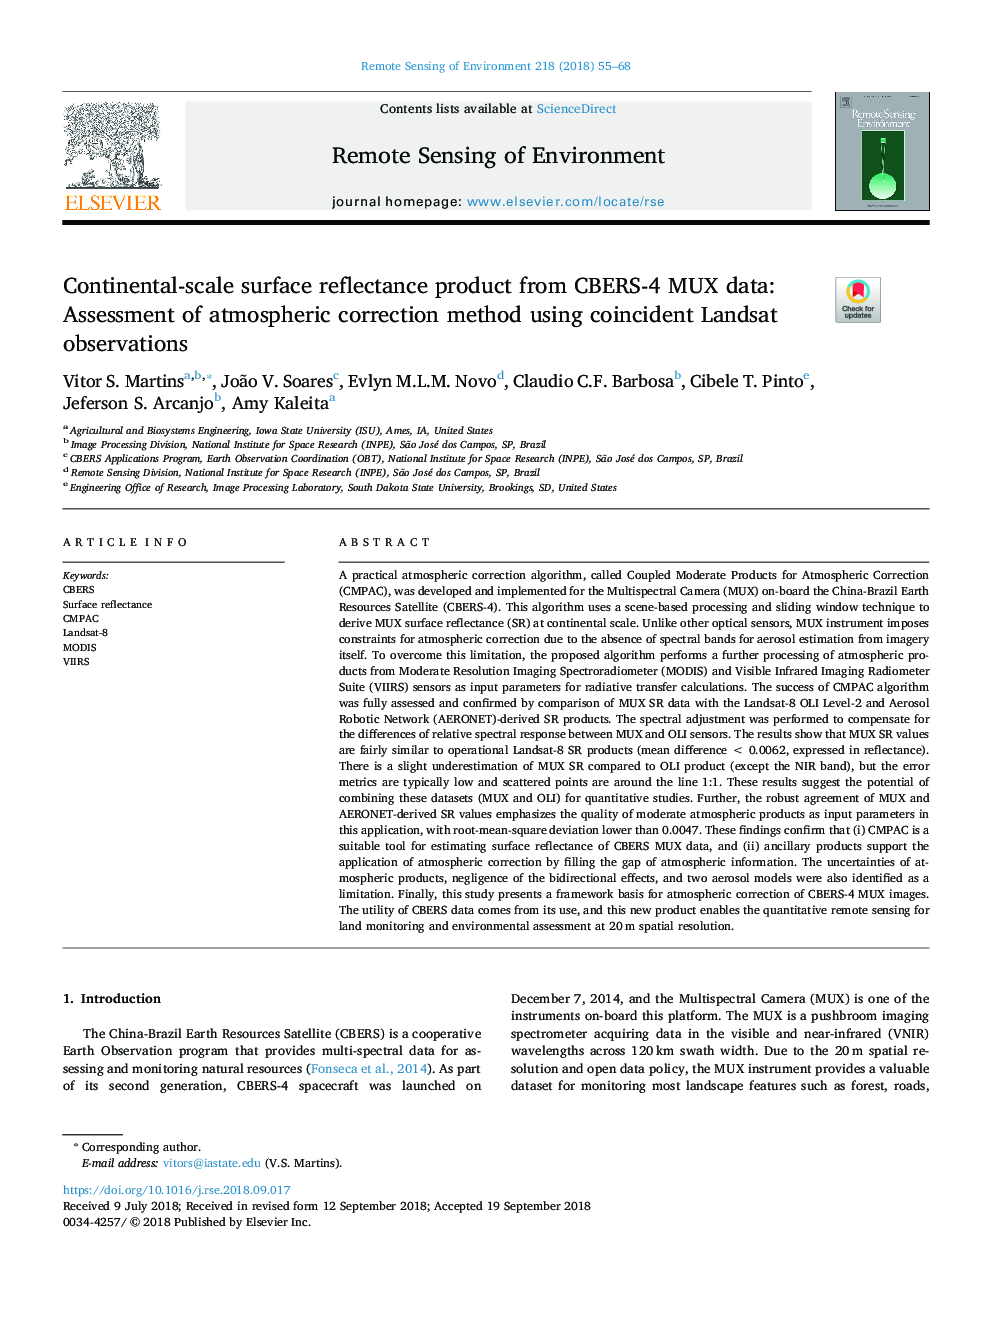 Continental-scale surface reflectance product from CBERS-4 MUX data: Assessment of atmospheric correction method using coincident Landsat observations